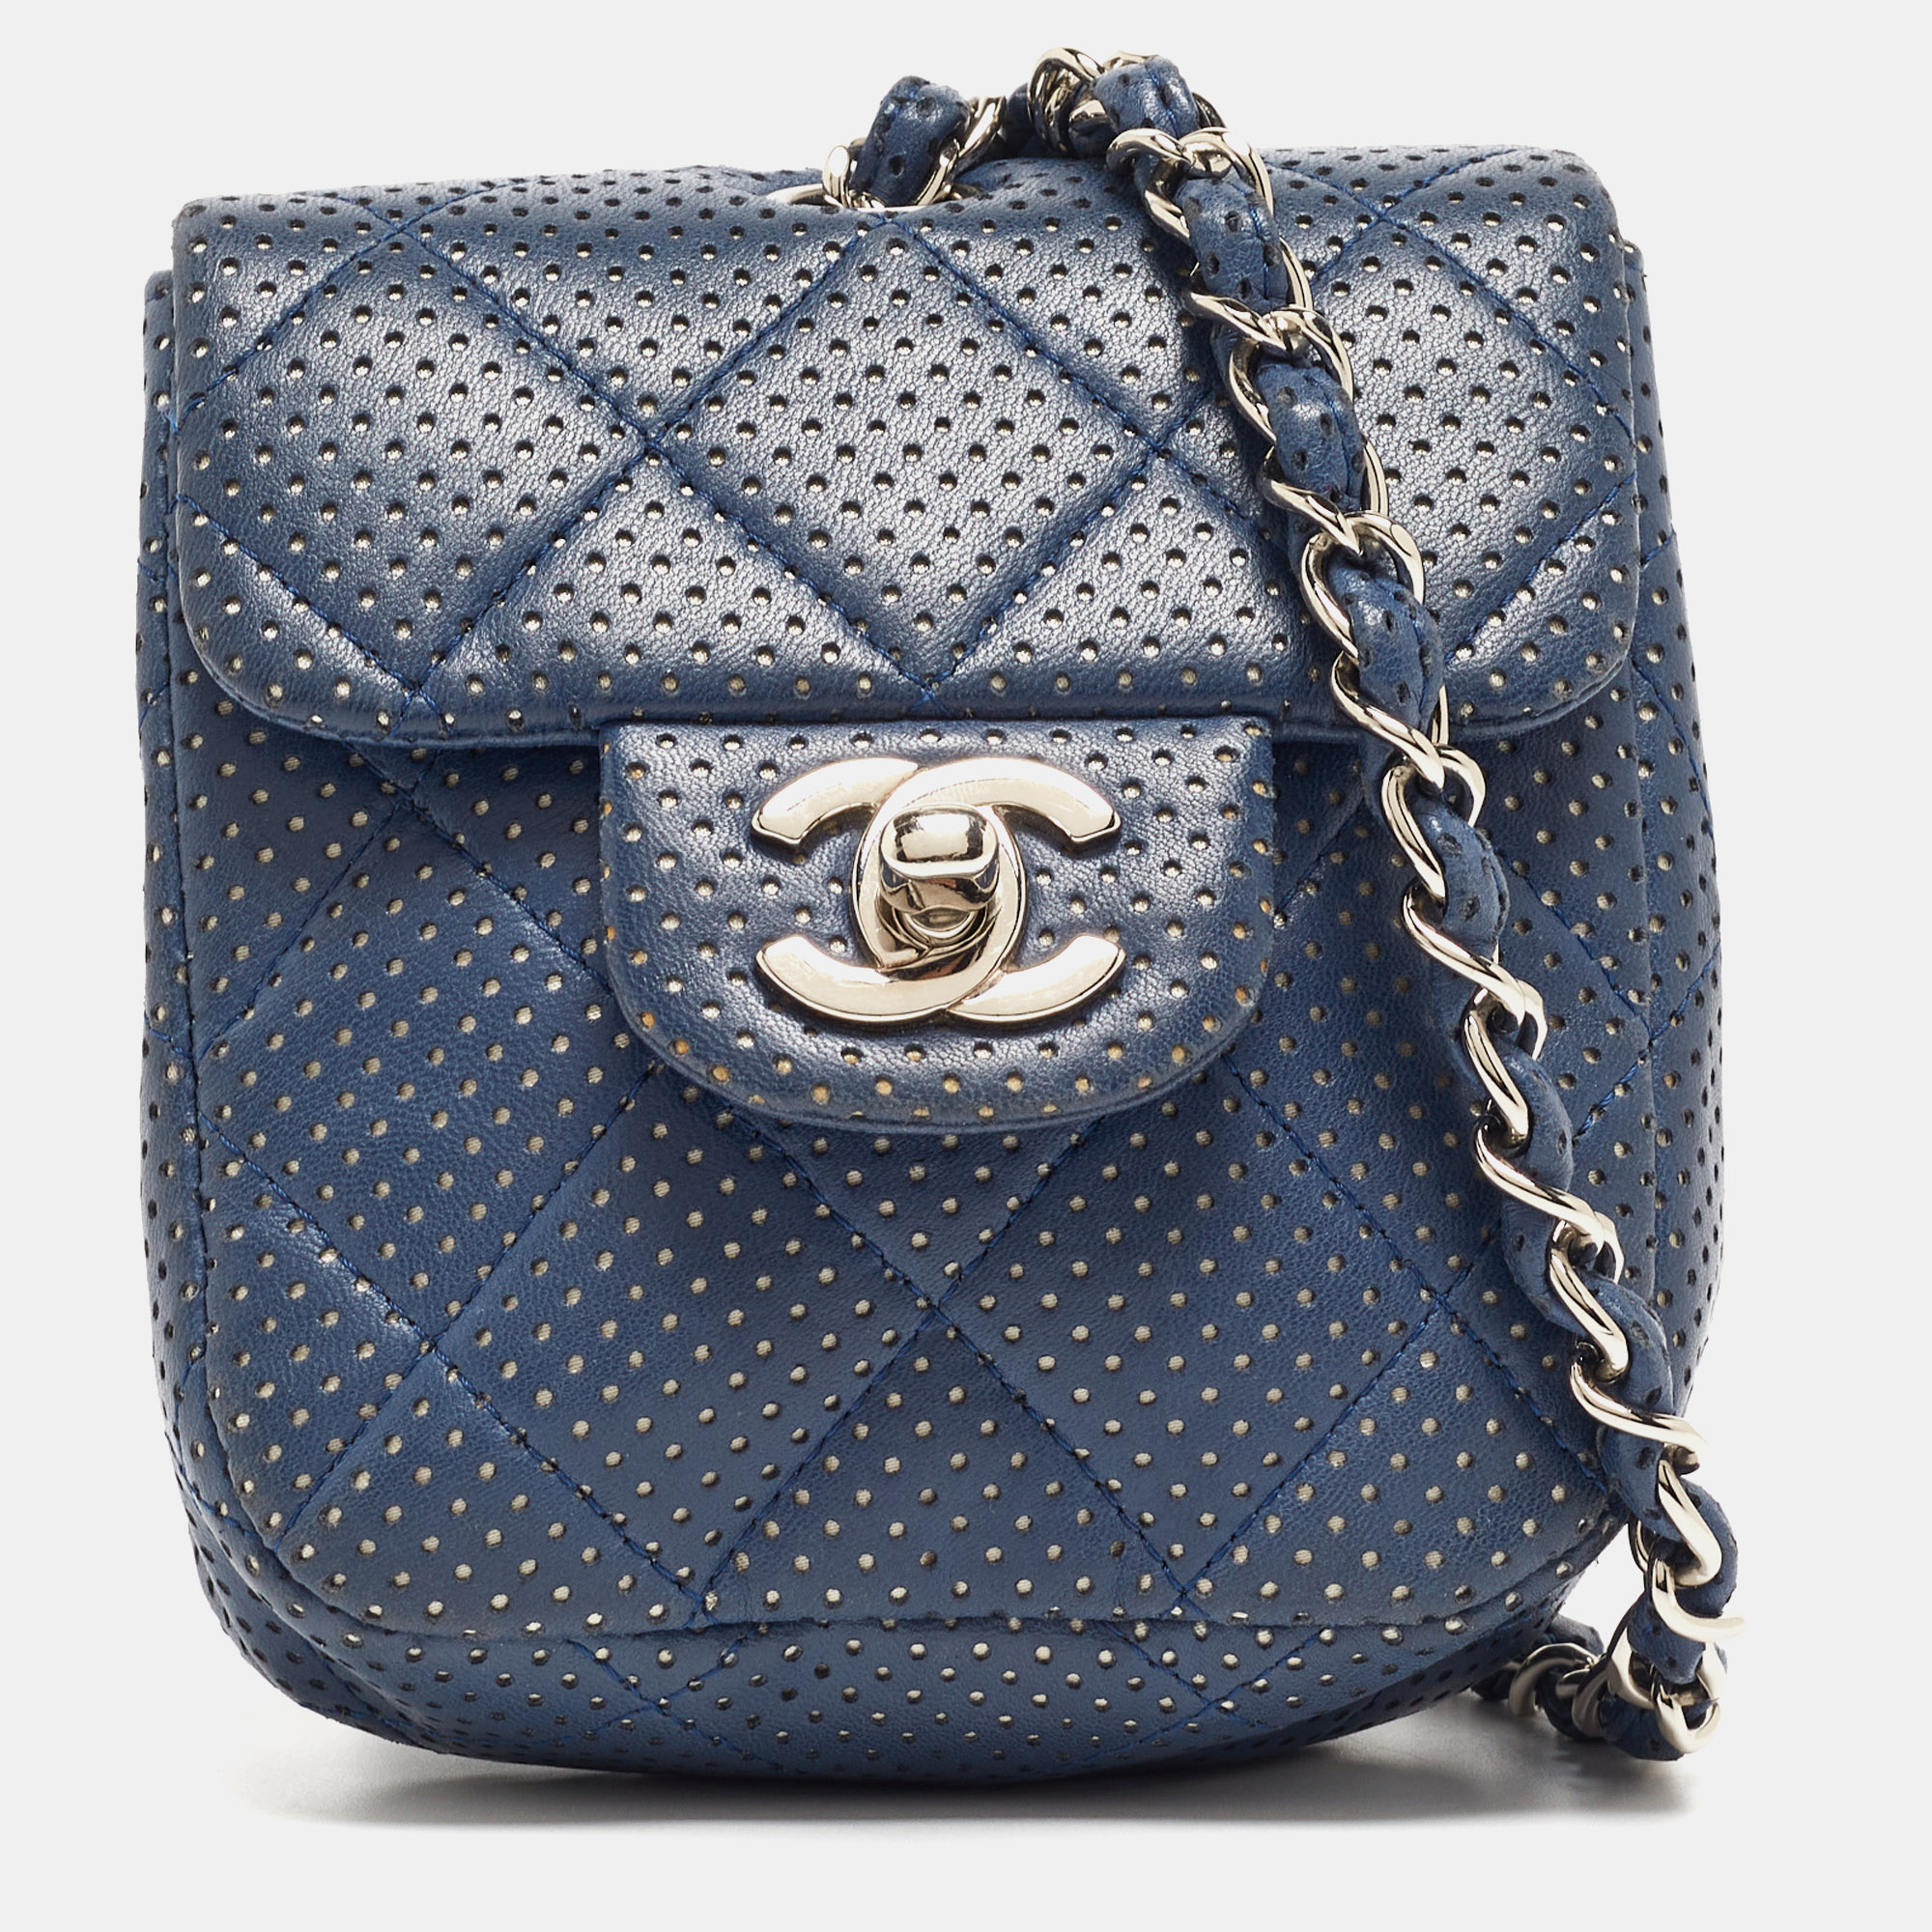 Chanel navy blue quilted perforated leather mini crossbody bag